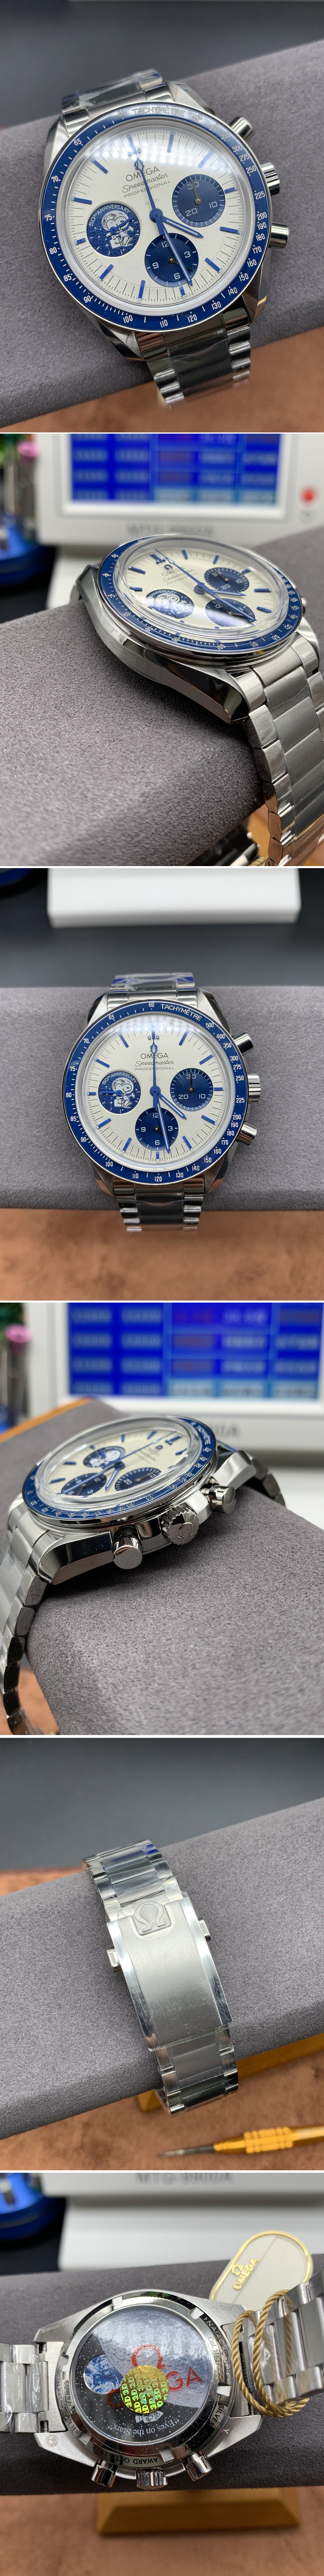 Replica Omega Speedmaster SS Blue Snoopy OMF 1:1 Best Edition White Dial on New SS Bracelet Manual Winding Chrono Movement